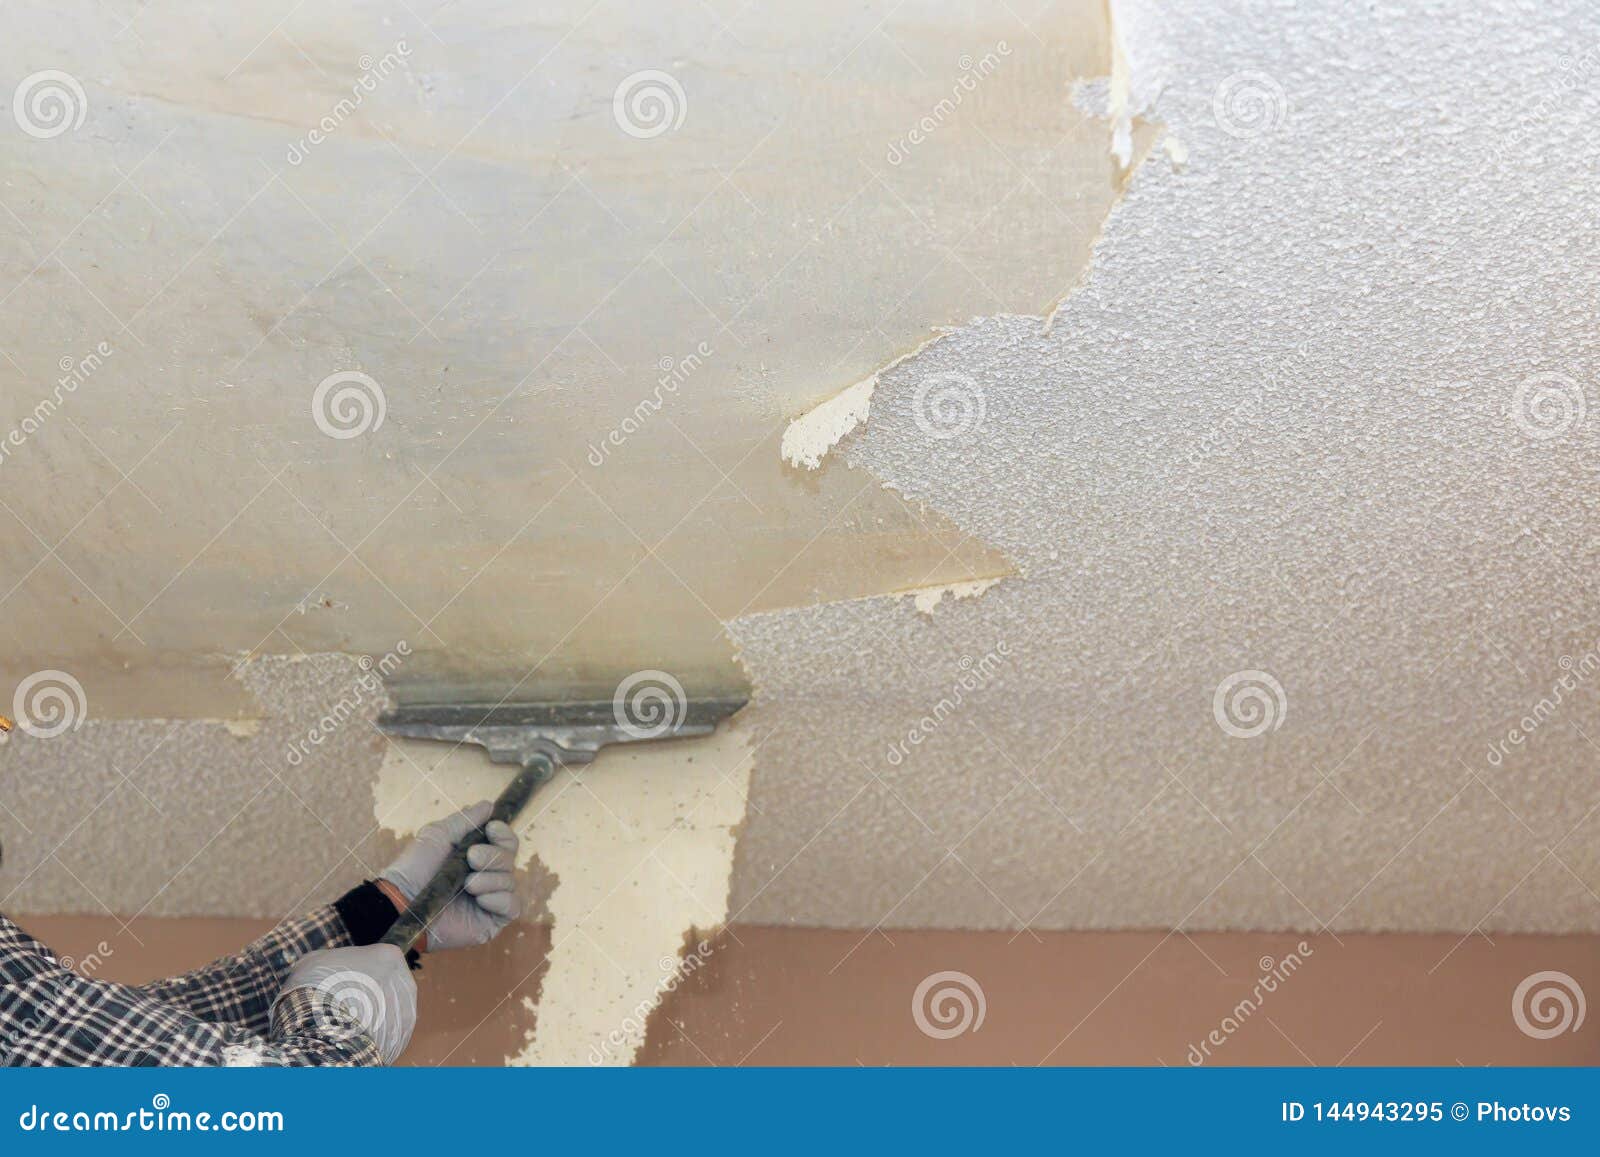 Take Off In The Popcorn Ceiling Home Wall Texture Removal Stock